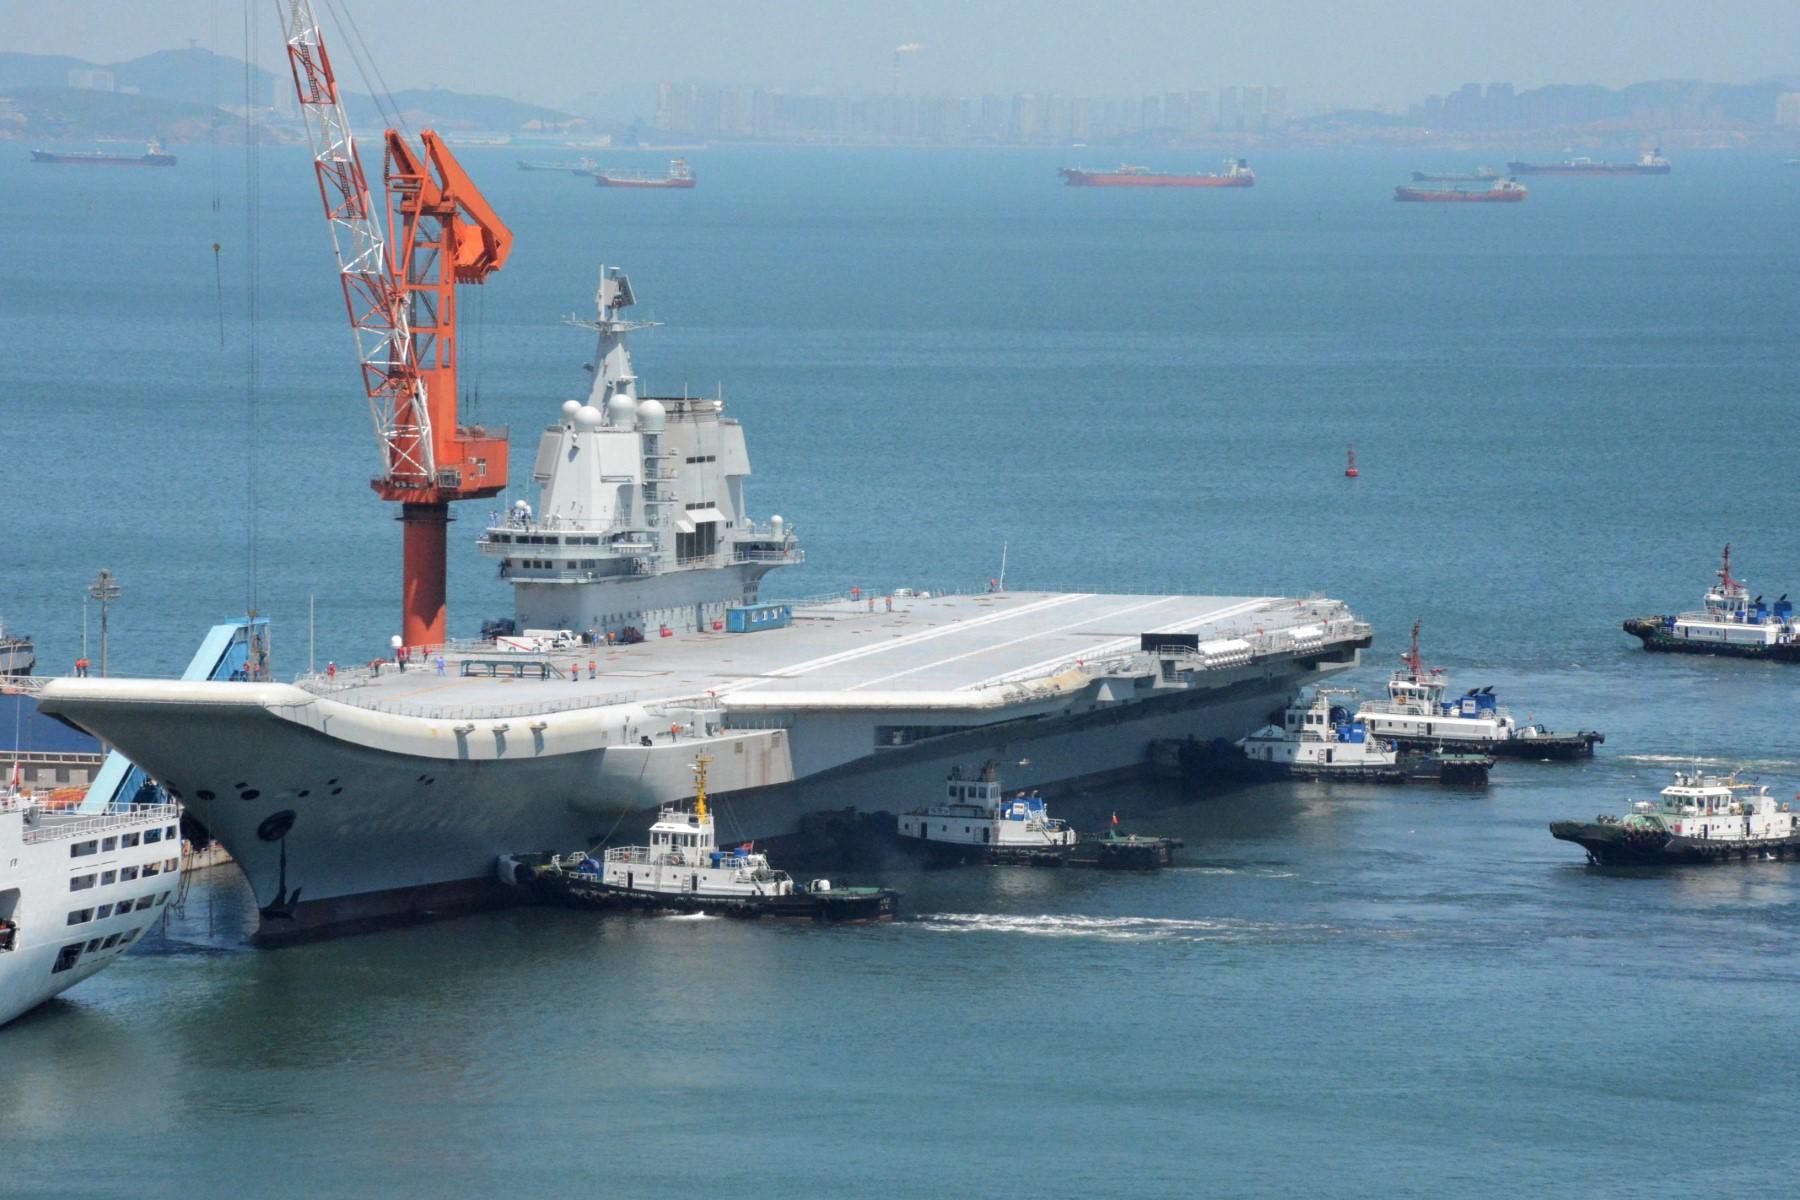 This photo taken on May 18, 2018 shows tugs guiding China's first domestically manufactured aircraft carrier, known as 'Type 001A', as it returns to port in Dalian in China's northeastern Liaoning province after its first sea trial. Photo: AFP